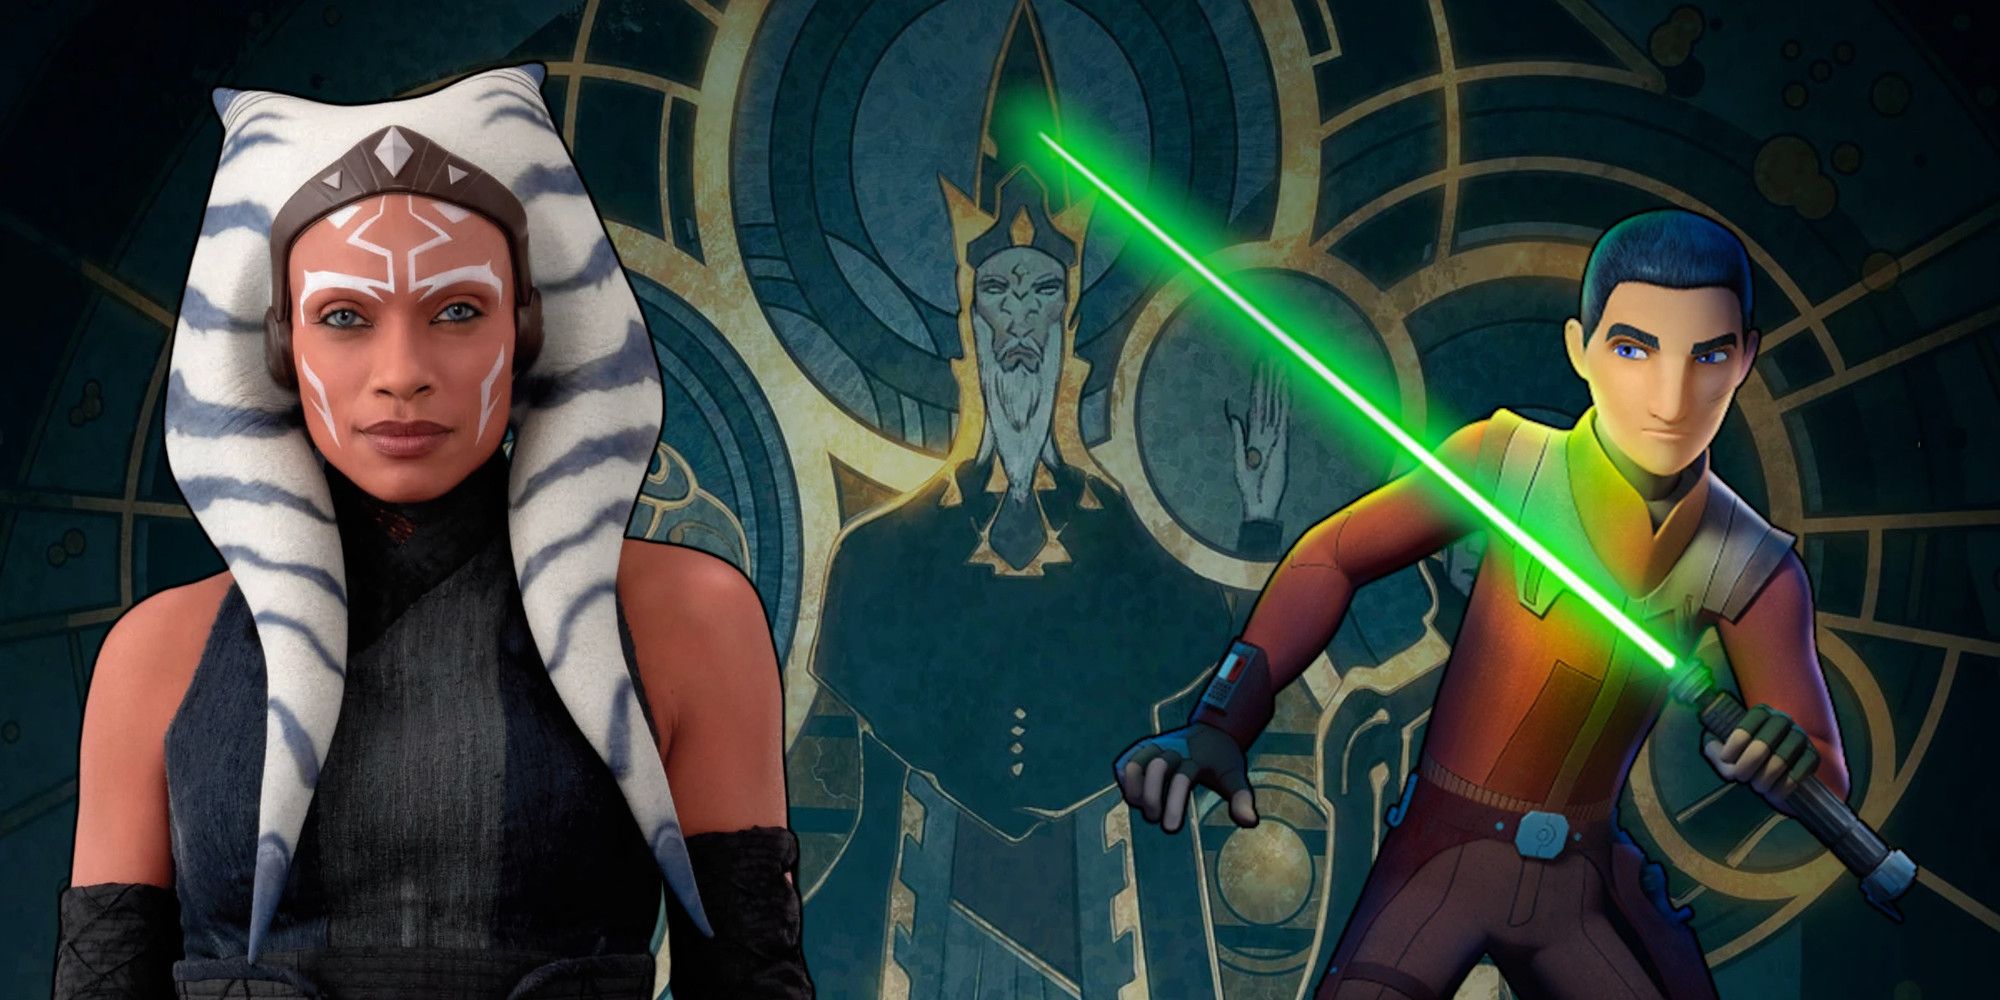 Ahsoka Tano and Ezra Bridger along with a painting of the Mortis Gods from Star Wars